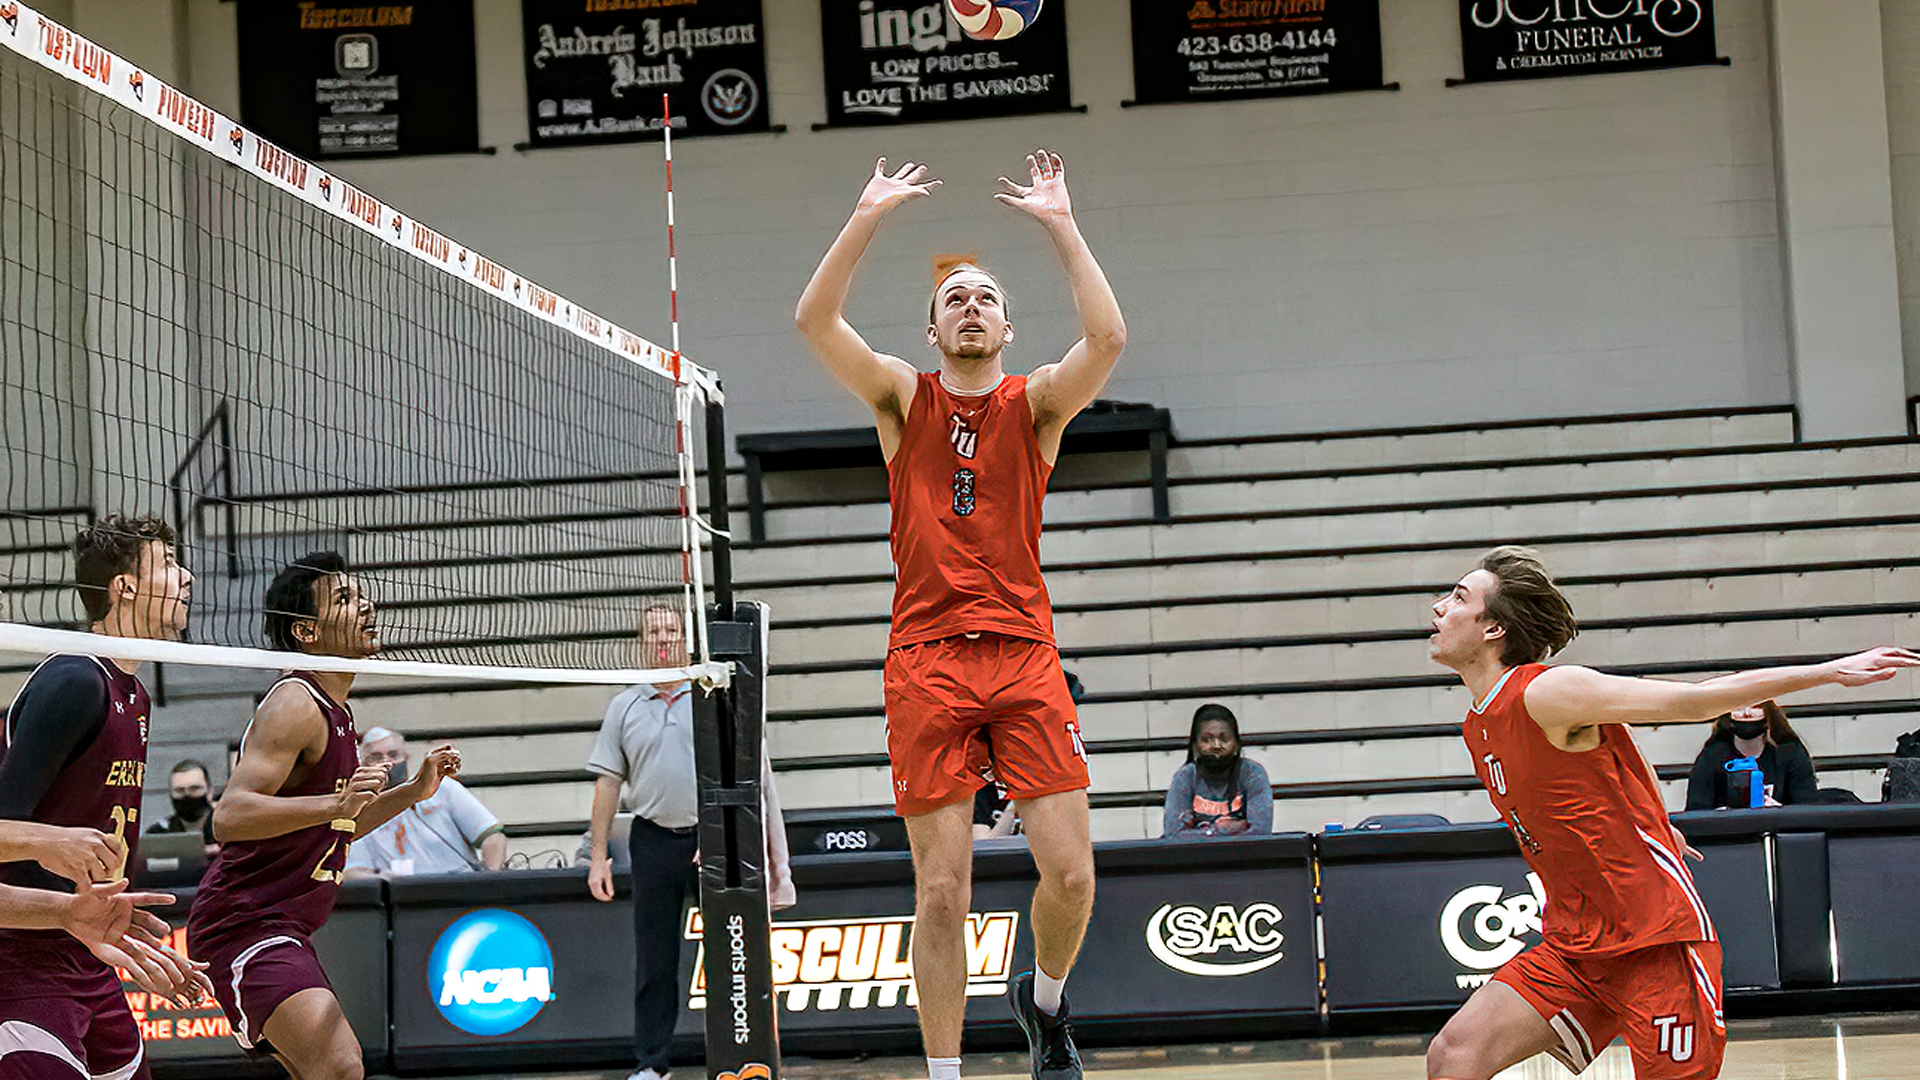 Tusculum victorious in first meeting with Barton